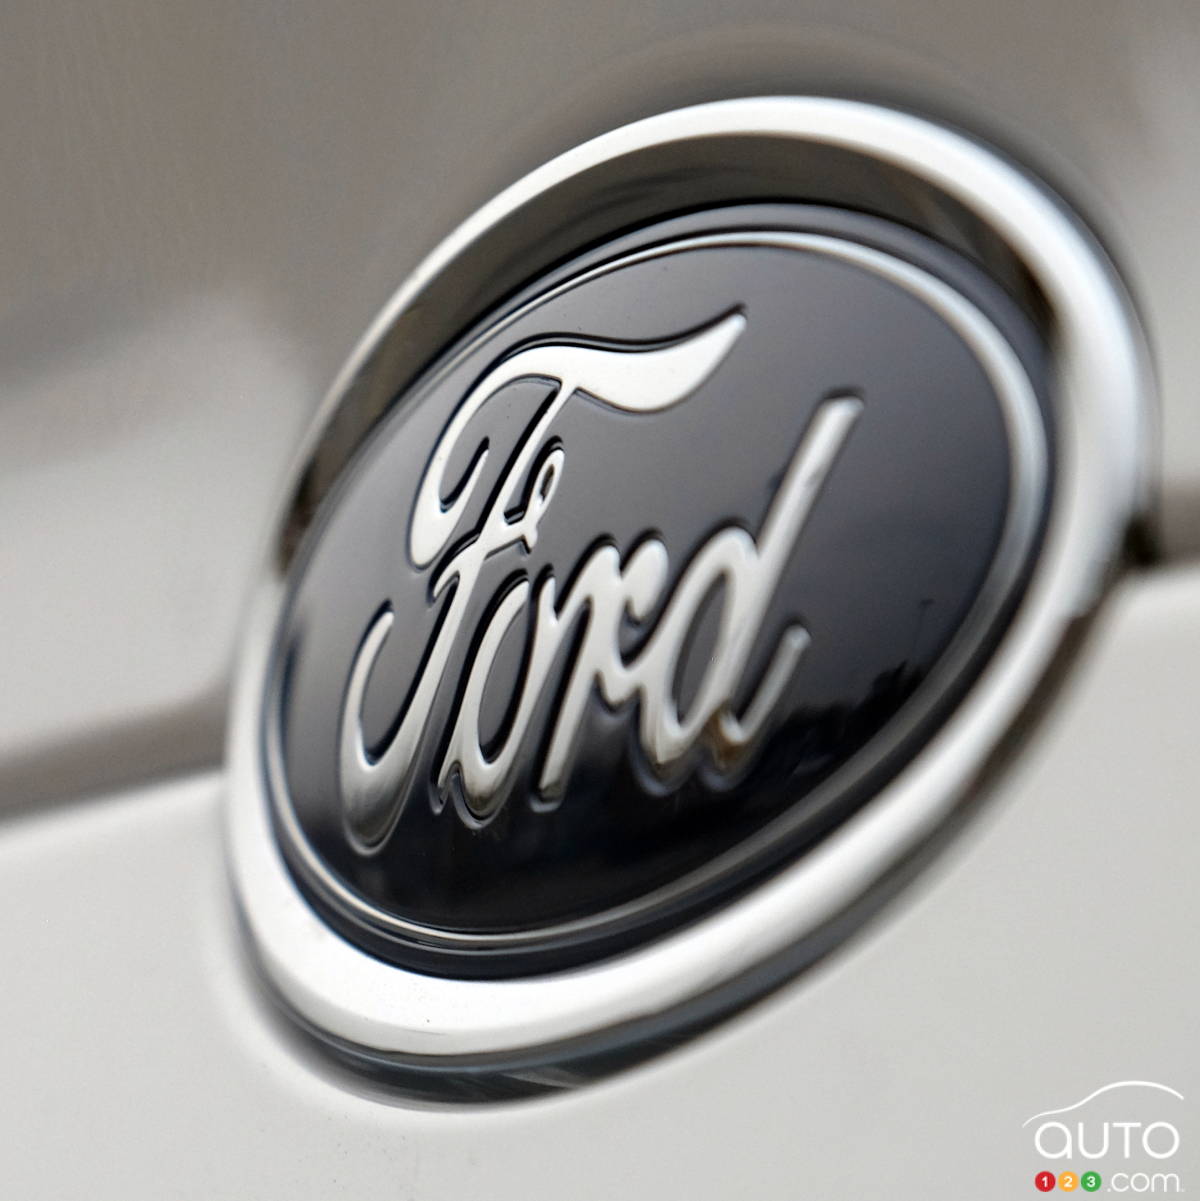 Ford Trademarks the Rattler Name